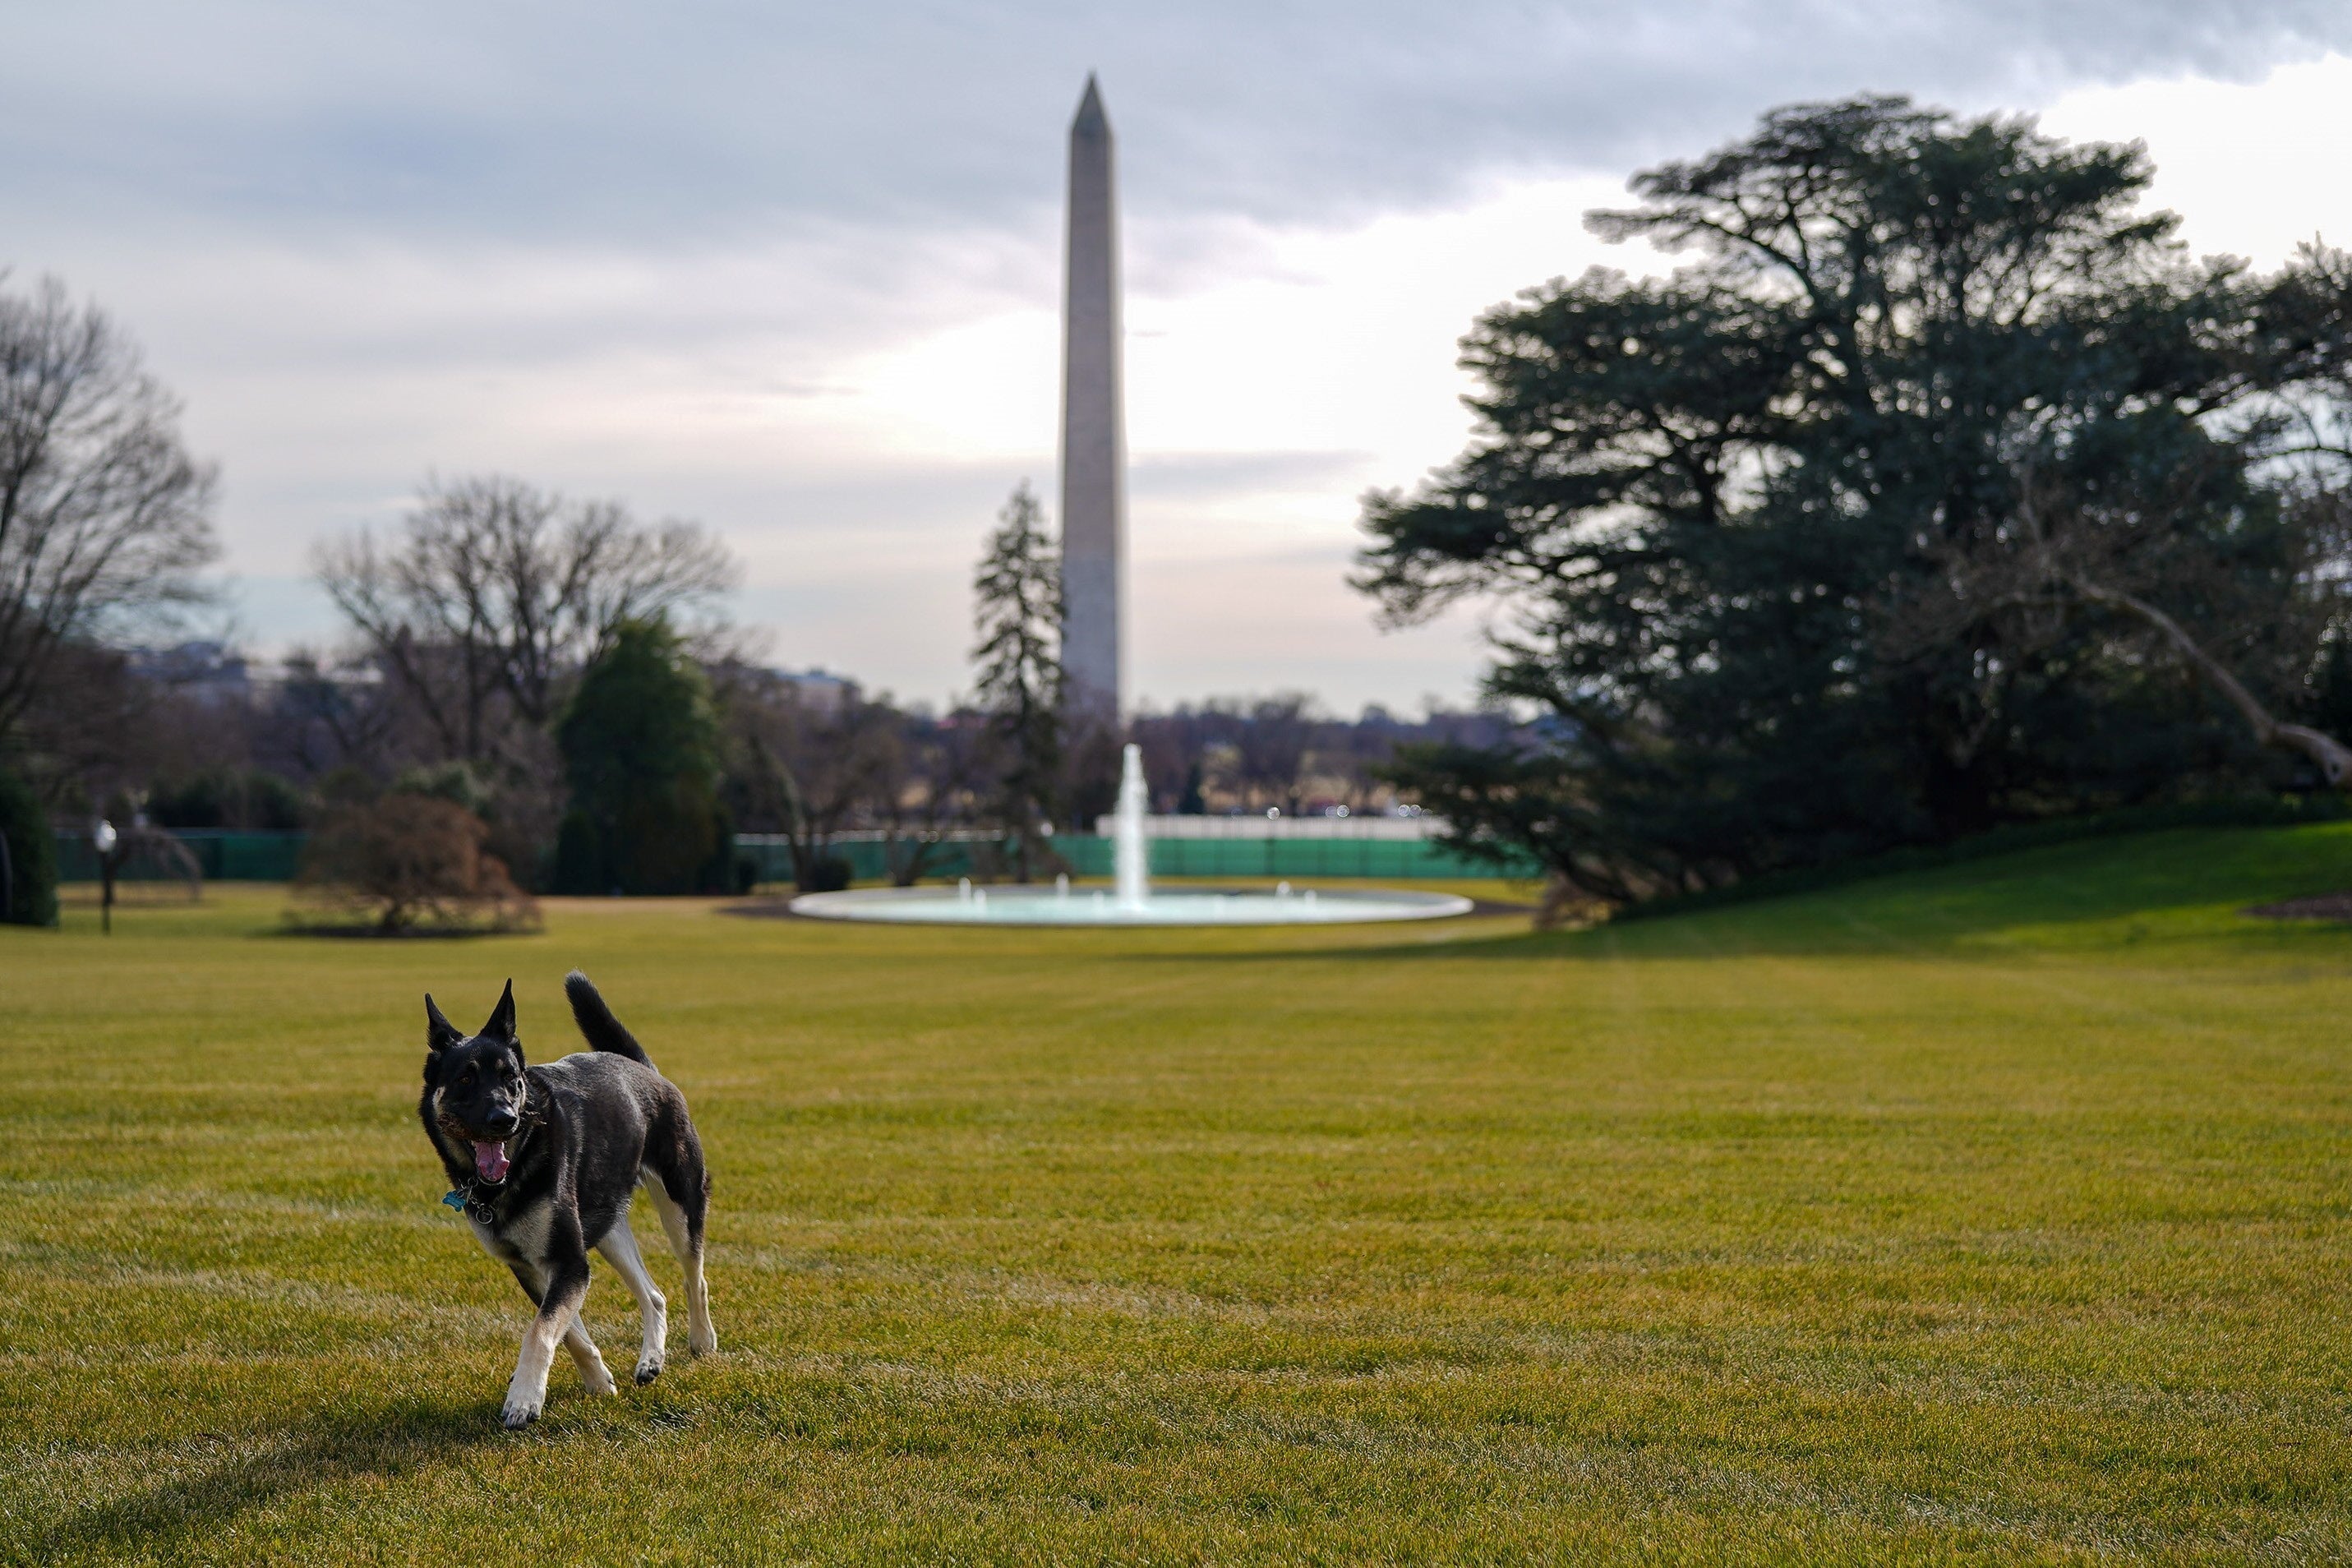 Joe Biden's dog, Major, walking on the White House grounds with the Washington Monument in the background.